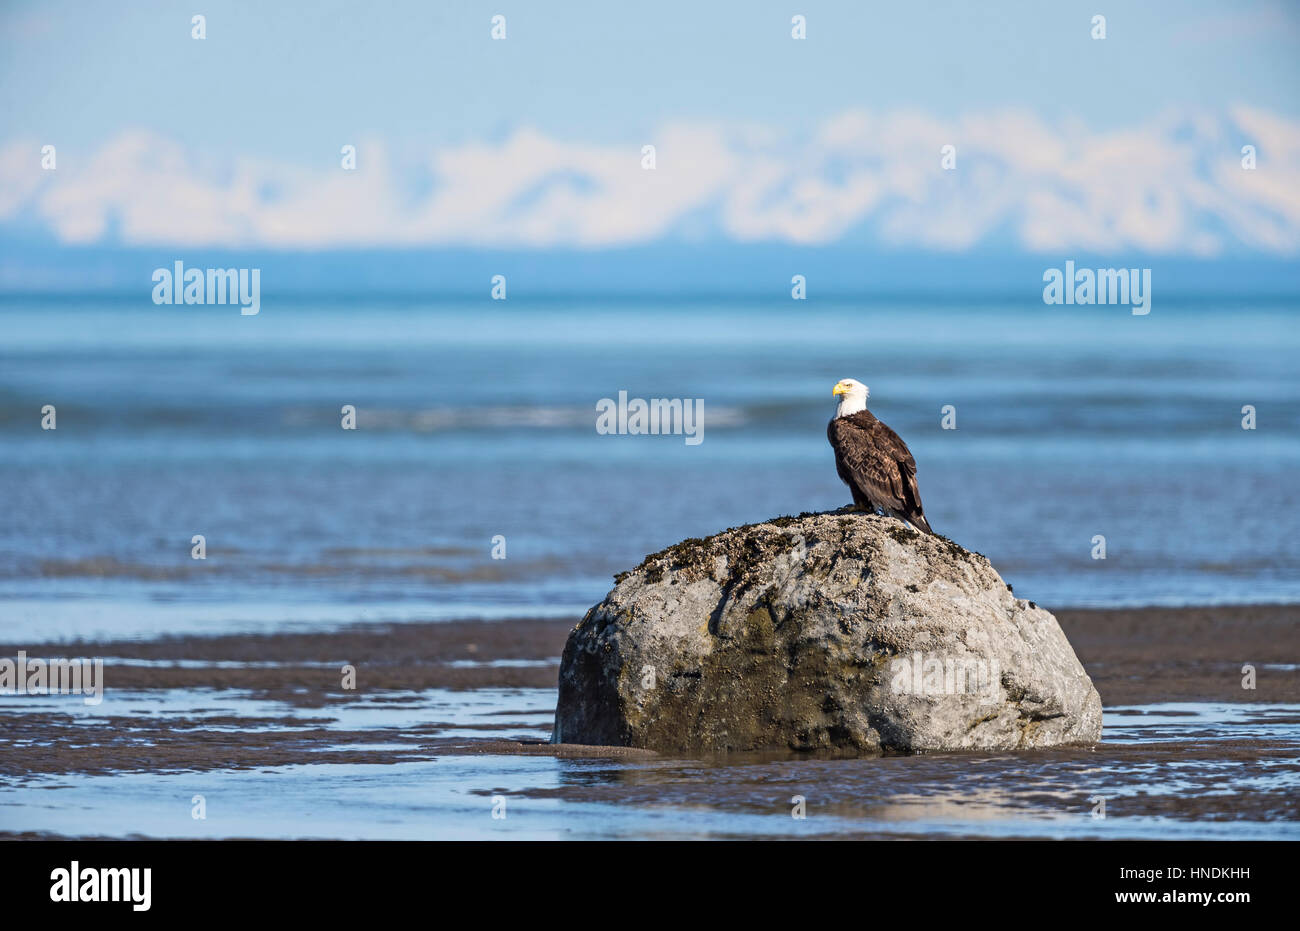 A bald eagle (Haliaeetus leucocephalus) sits on a rock at low tide set against Cook Inlet and the distant Kenai Mountains. Stock Photo